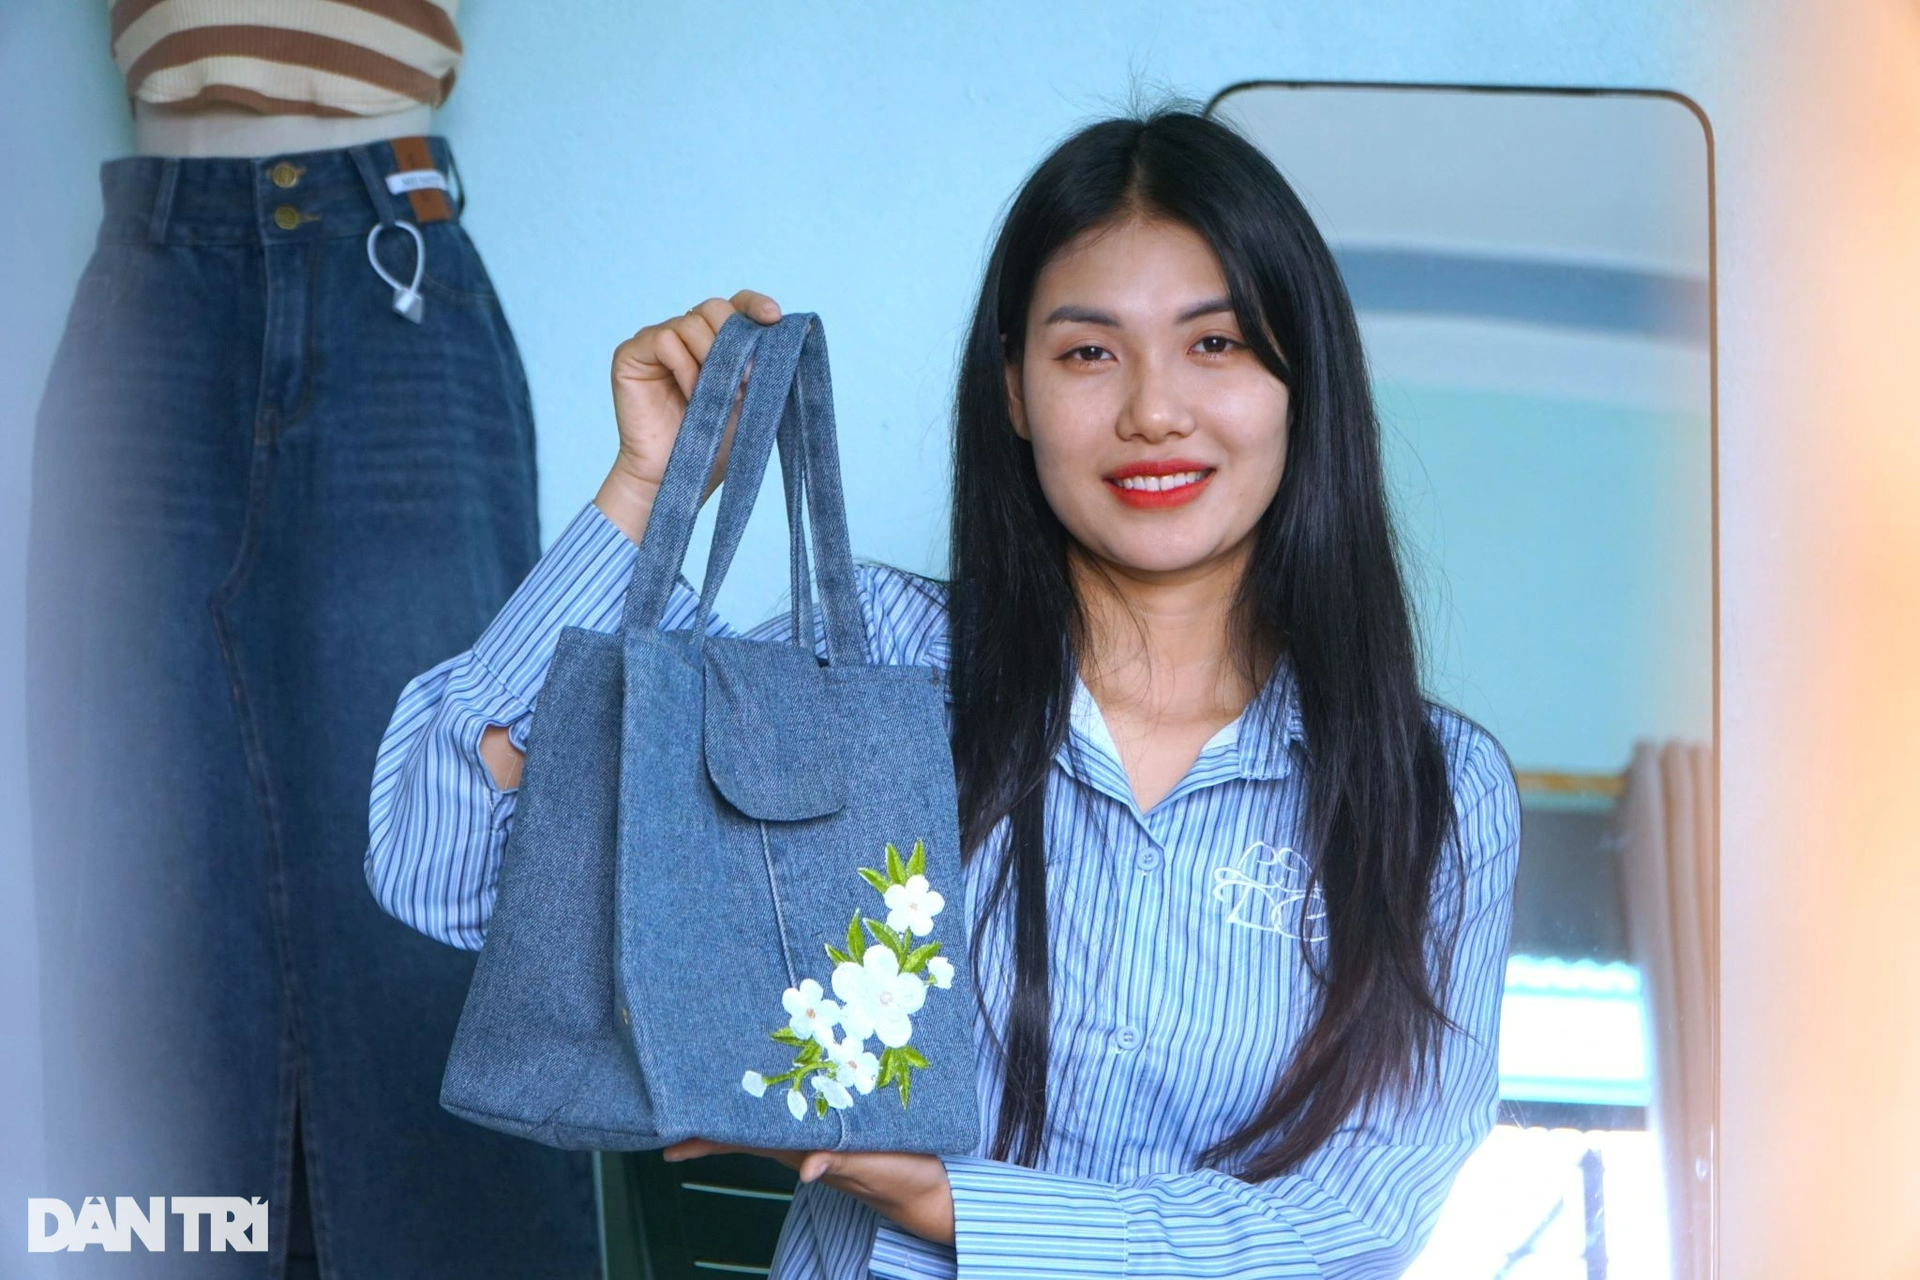 Thanh Hoa hot girl recycles discarded things into fashion products - 5